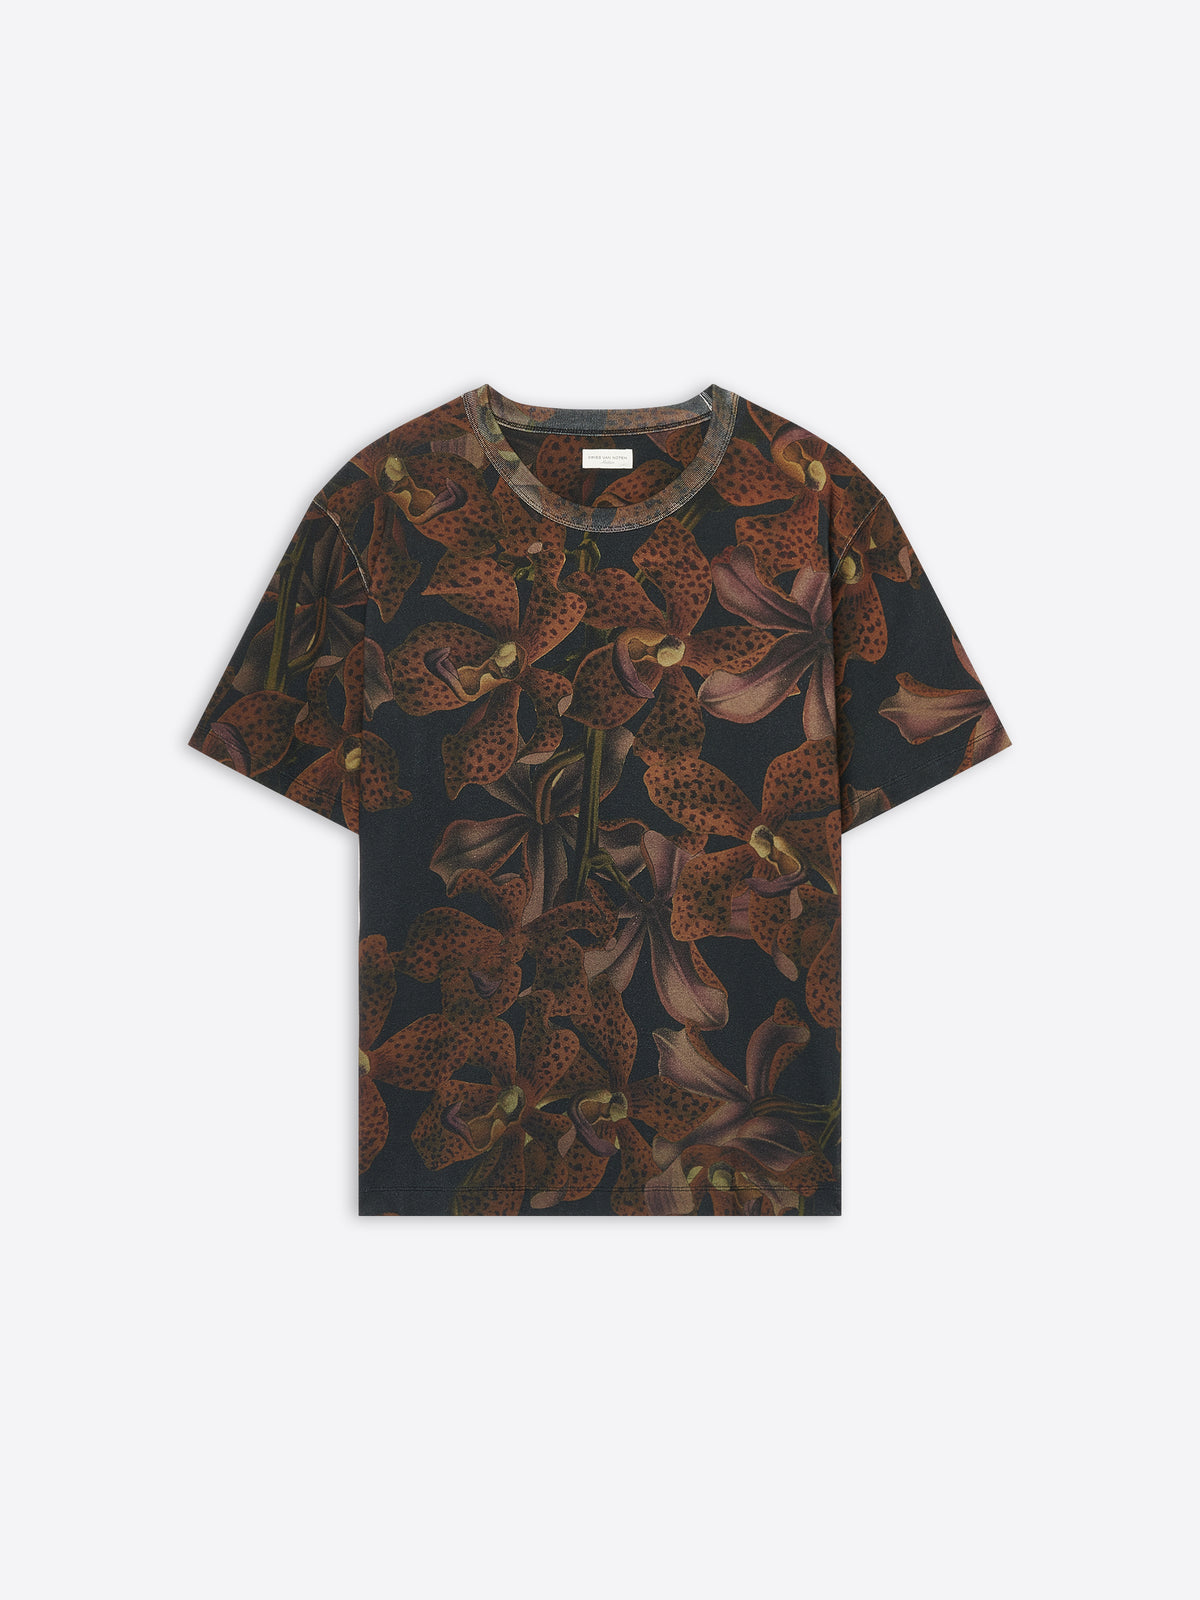 Orchids print tee